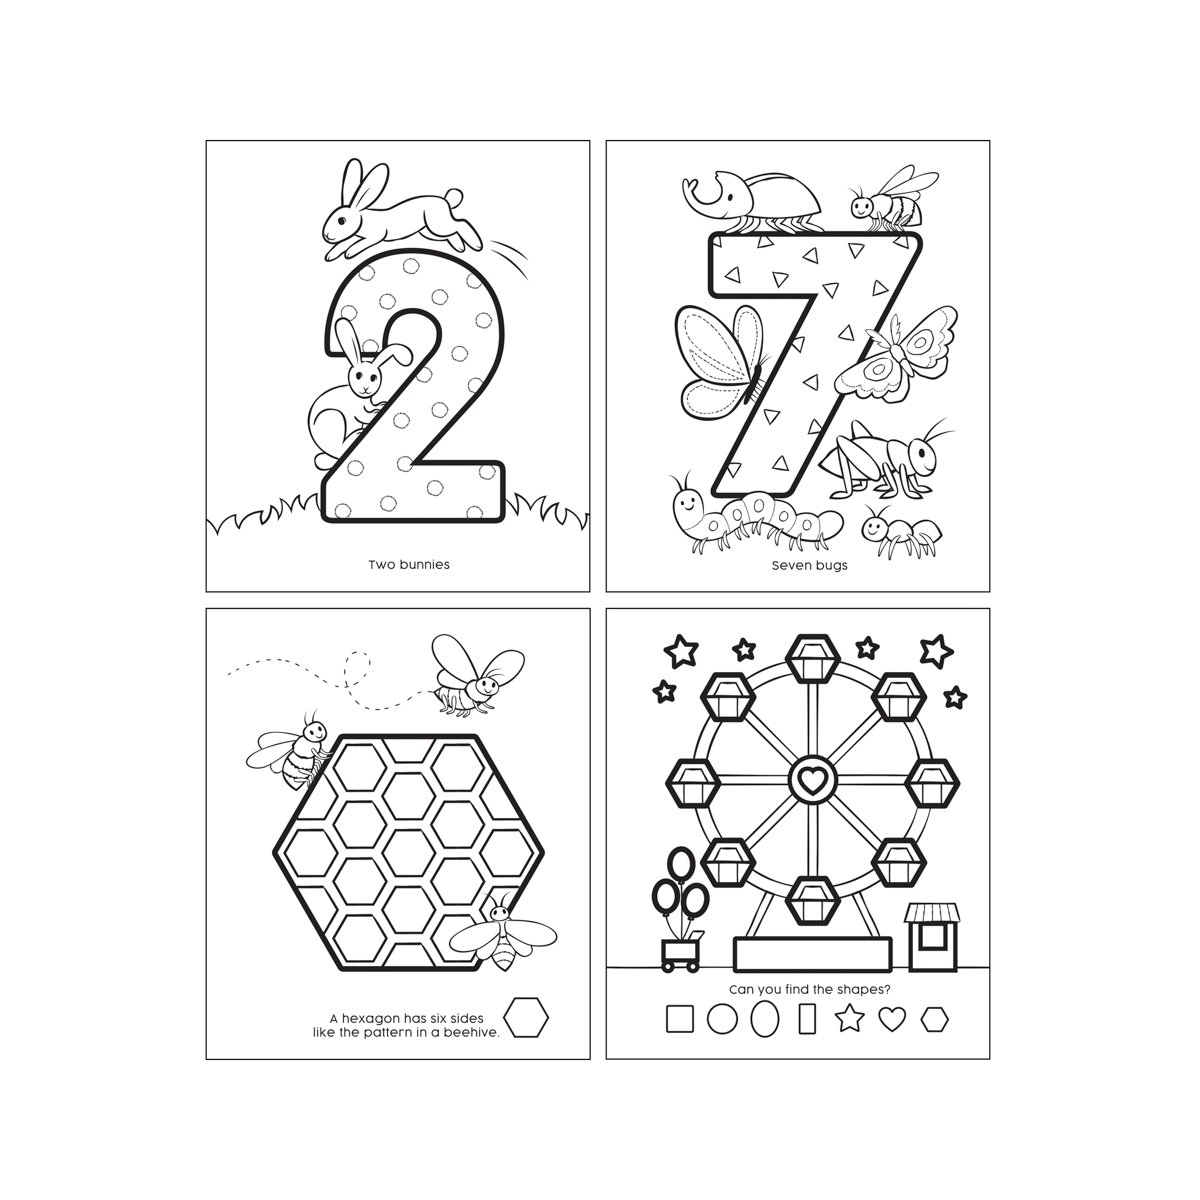 OOLY inside of Shapes and numbers coloring book